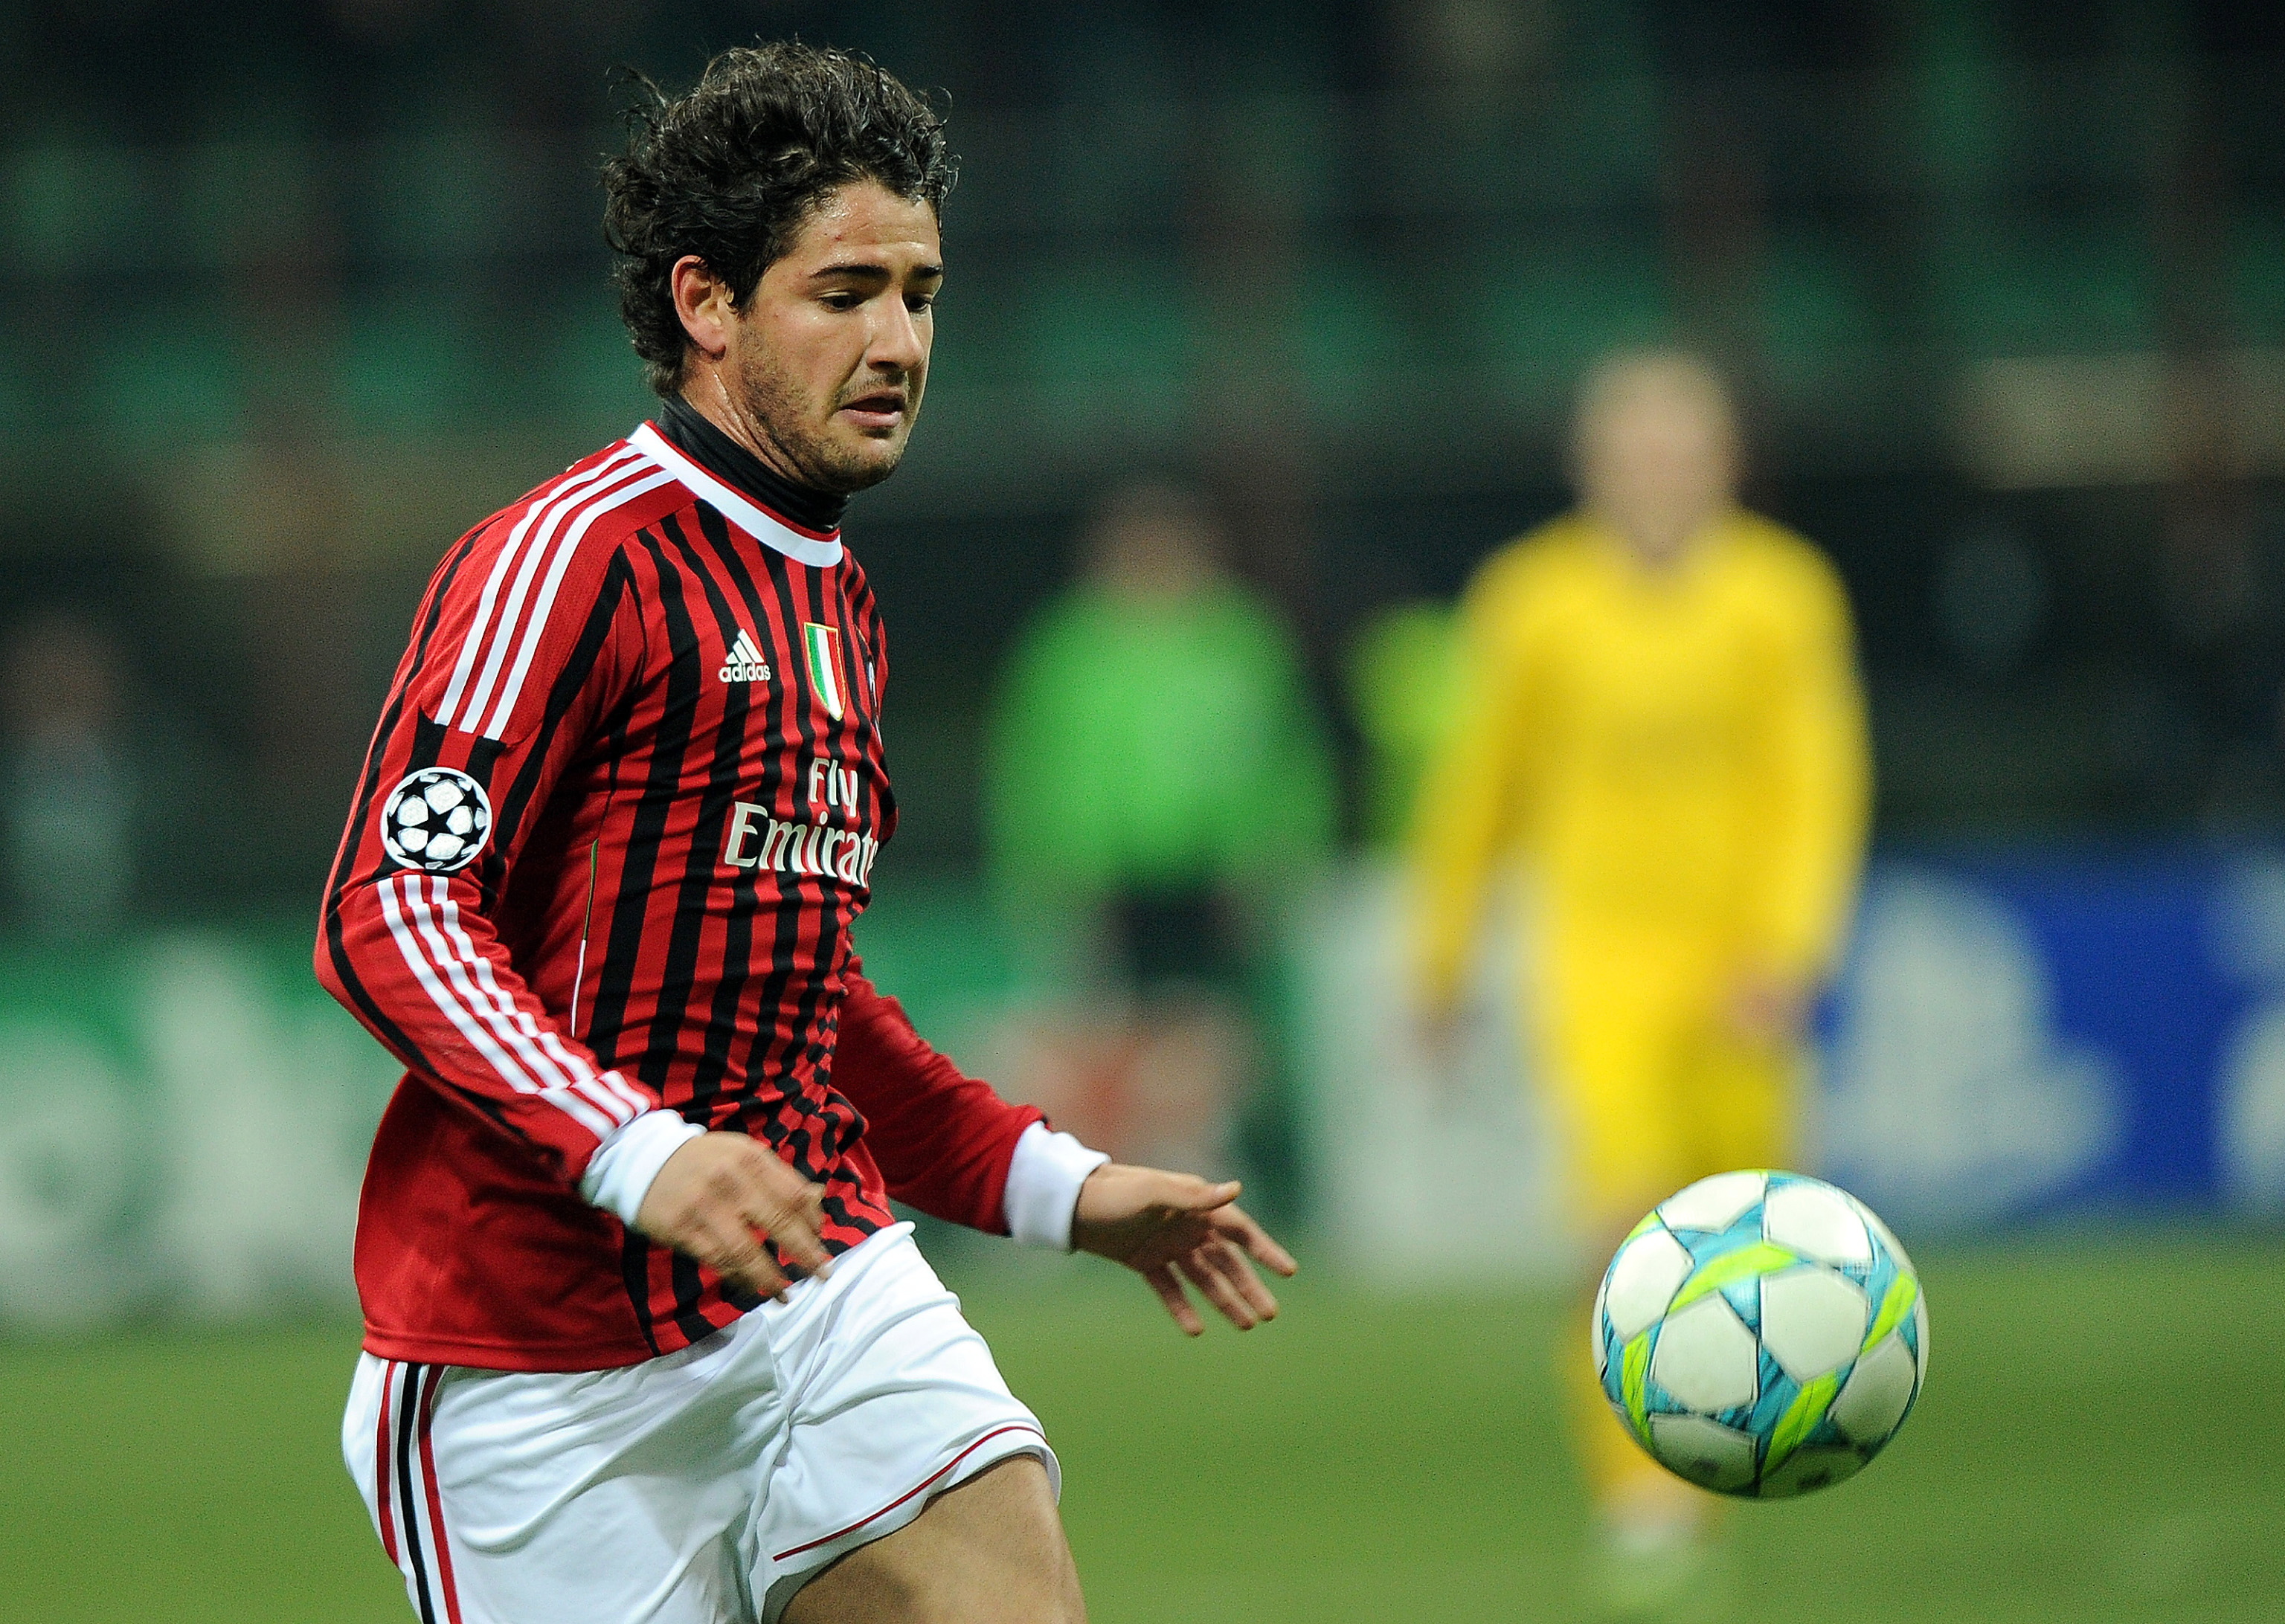 epa03107883 AC Milan Brazilian forward Alexandre Pato runs after the ball during a UEFA Champions League round of sixteen first leg match between AC Milan and Arsenal at the Giuseppe Meazza stadium in Milan, Italy, 15 February 2012.  EPA/DANIEL DAL ZENNARO